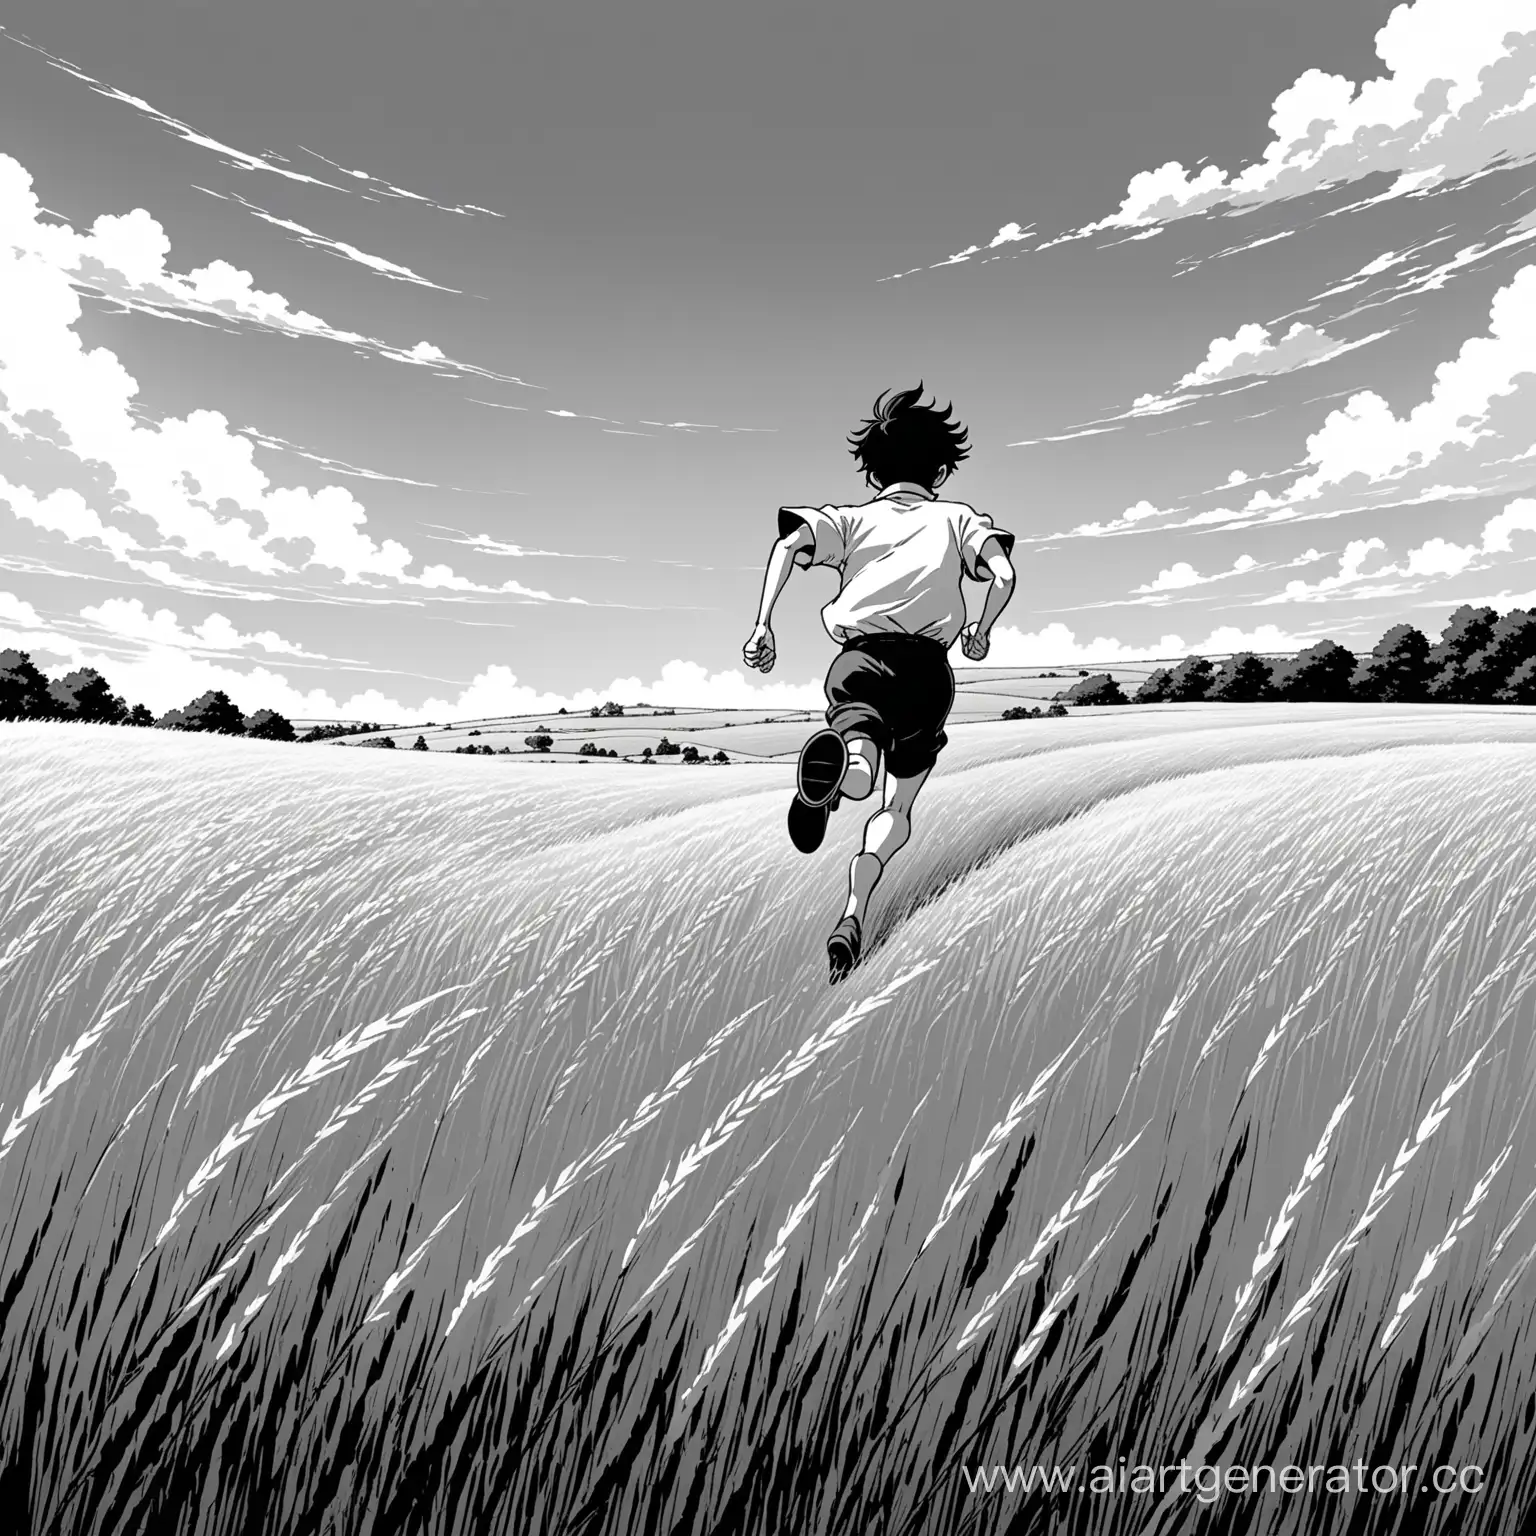 A black and white man runs against the wind across a field in the style of Studio Ghibli